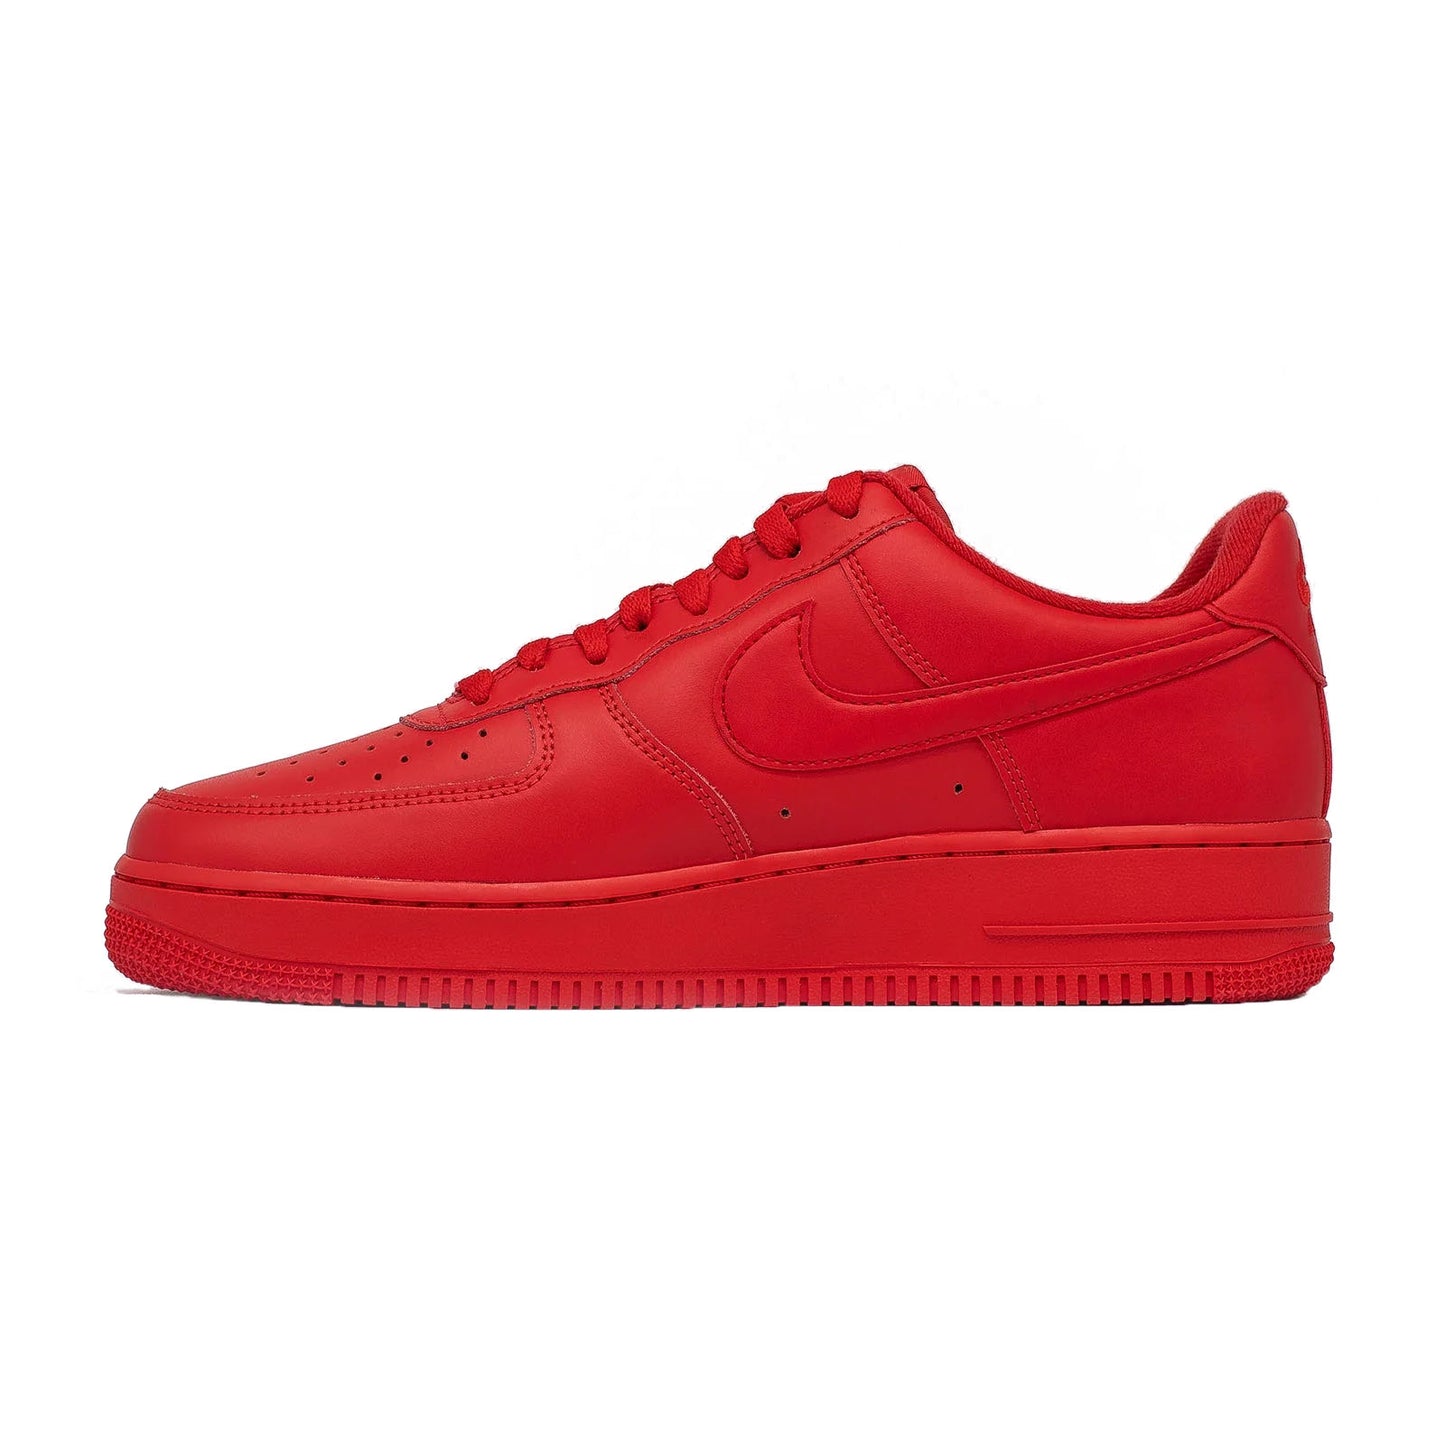 Nike Air Force 1 Low, '07 LV8 Triple Red